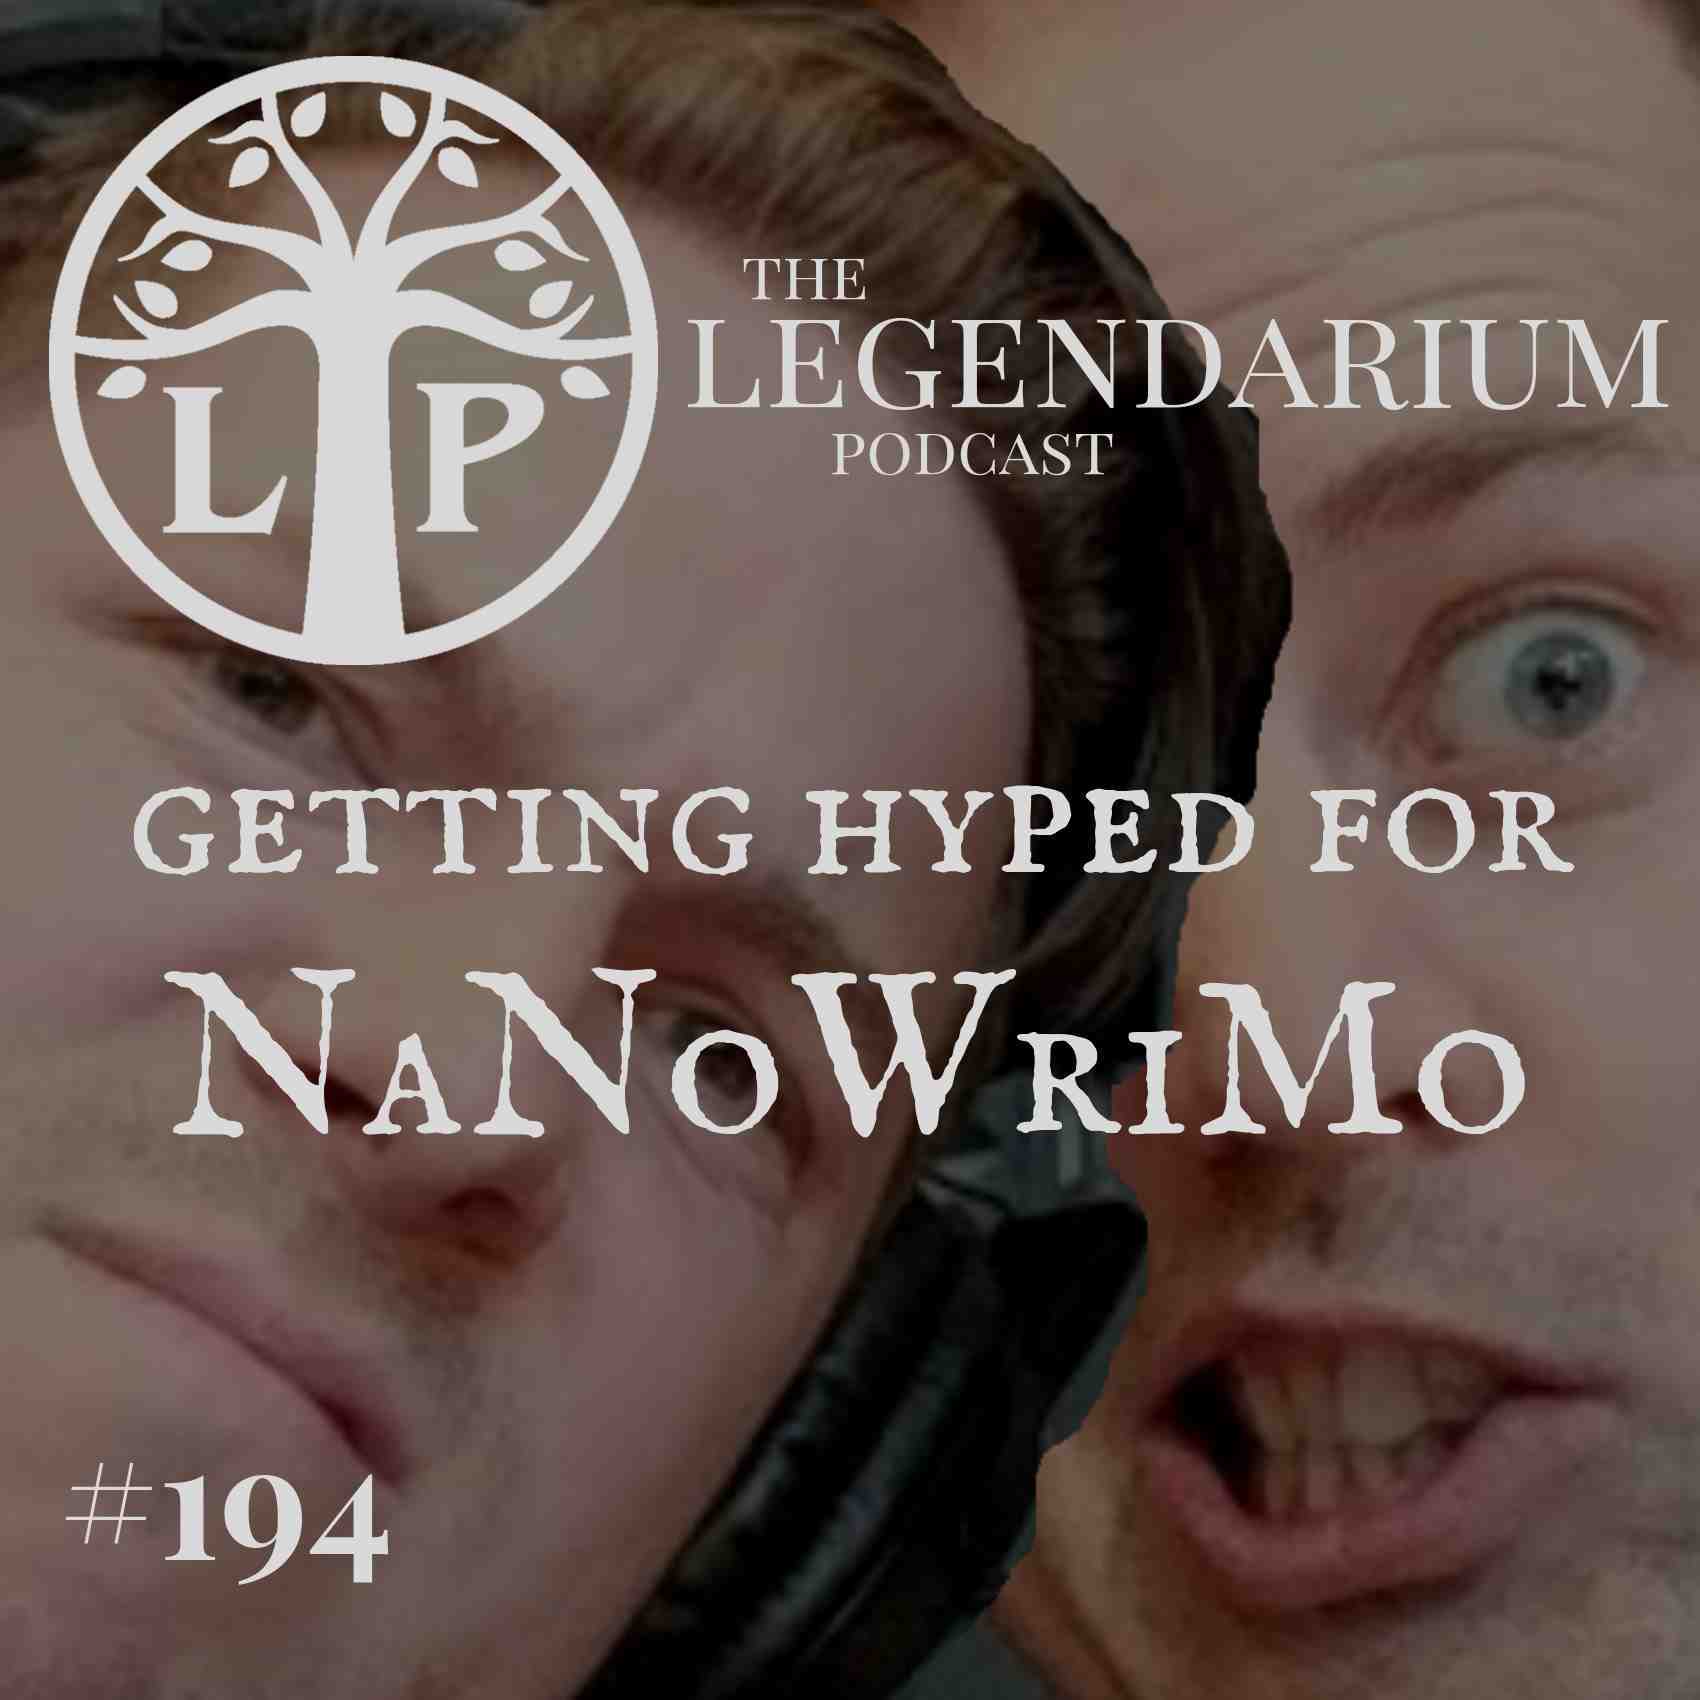 #194. Getting Hyped for NaNoWriMo